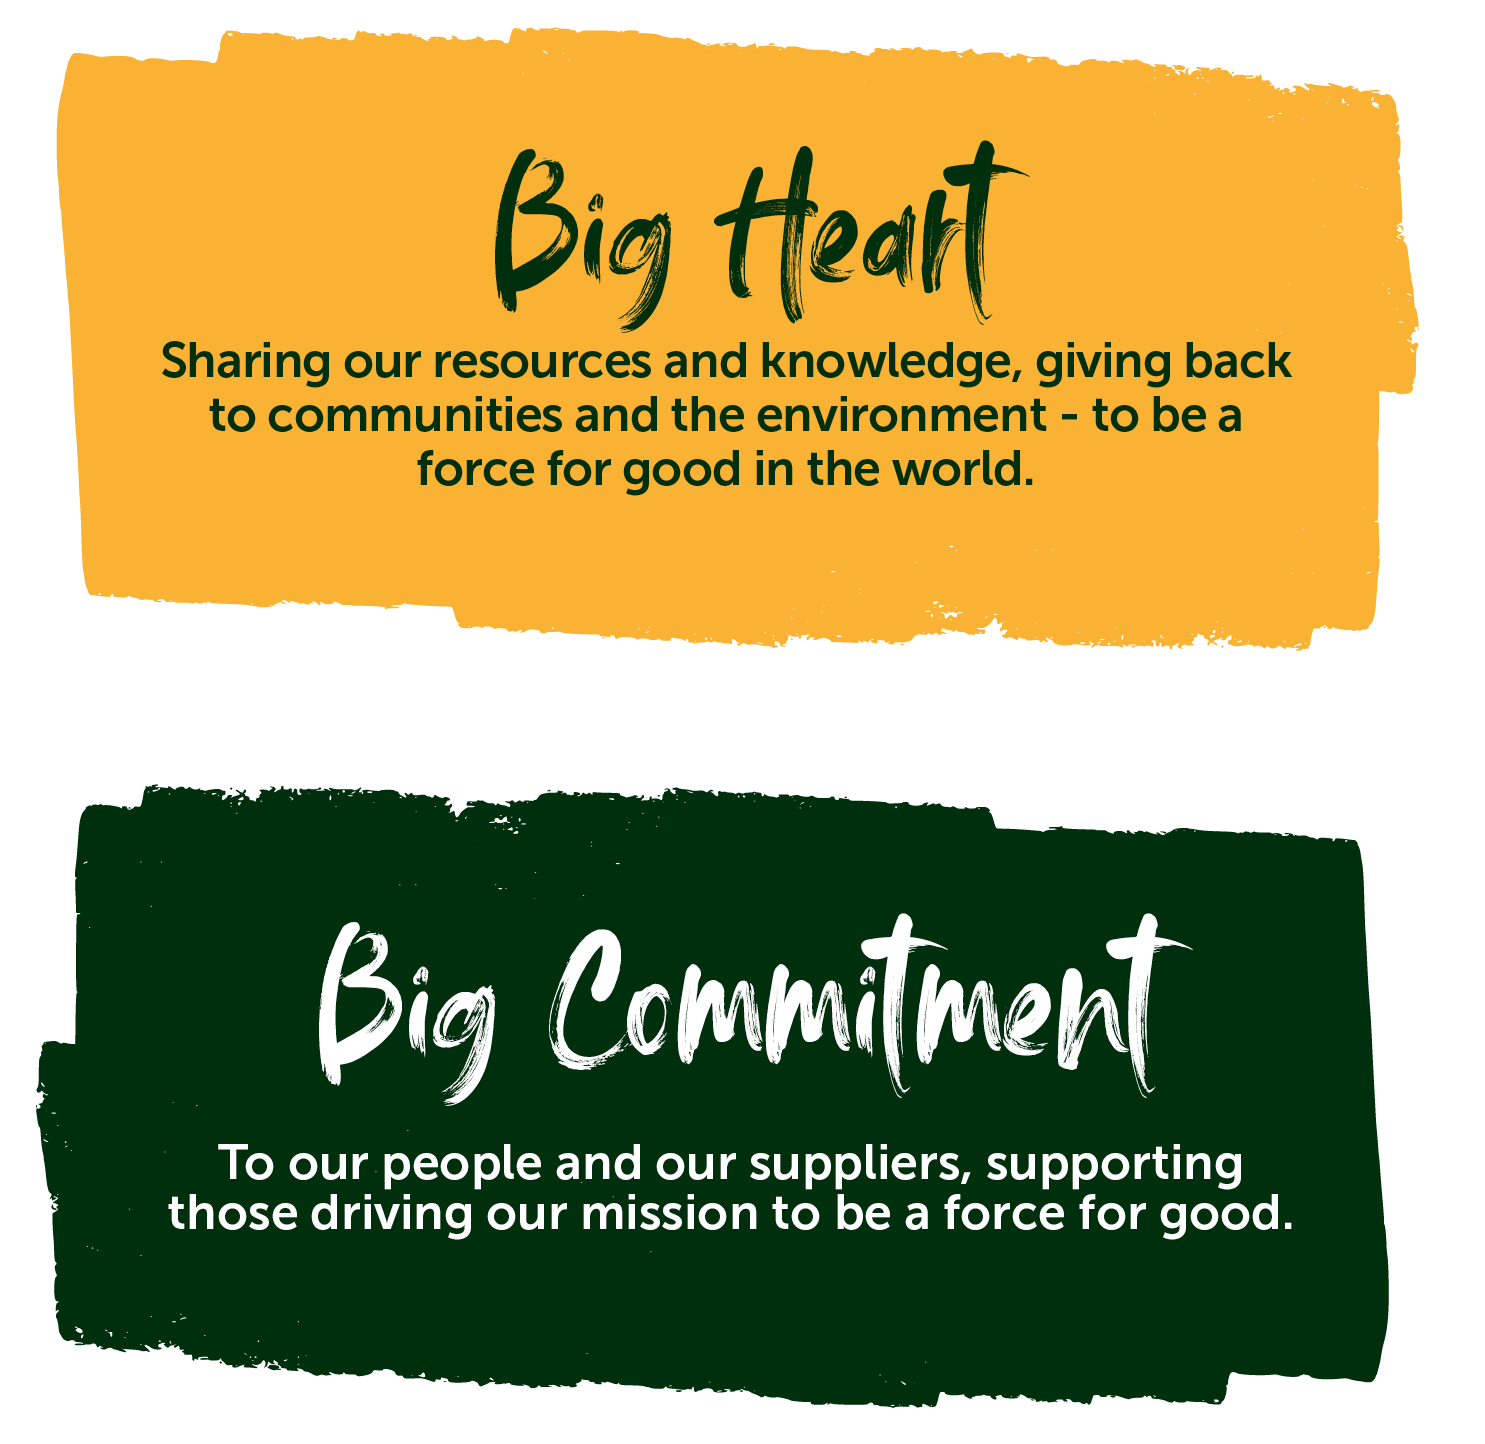 "Big Heart - Sharing our resources and knowledge, giving back to communities and the environment - to be a force for good in the world." and "Big Commitment - To our people and our suppliers those driving our mission to be a force for good."